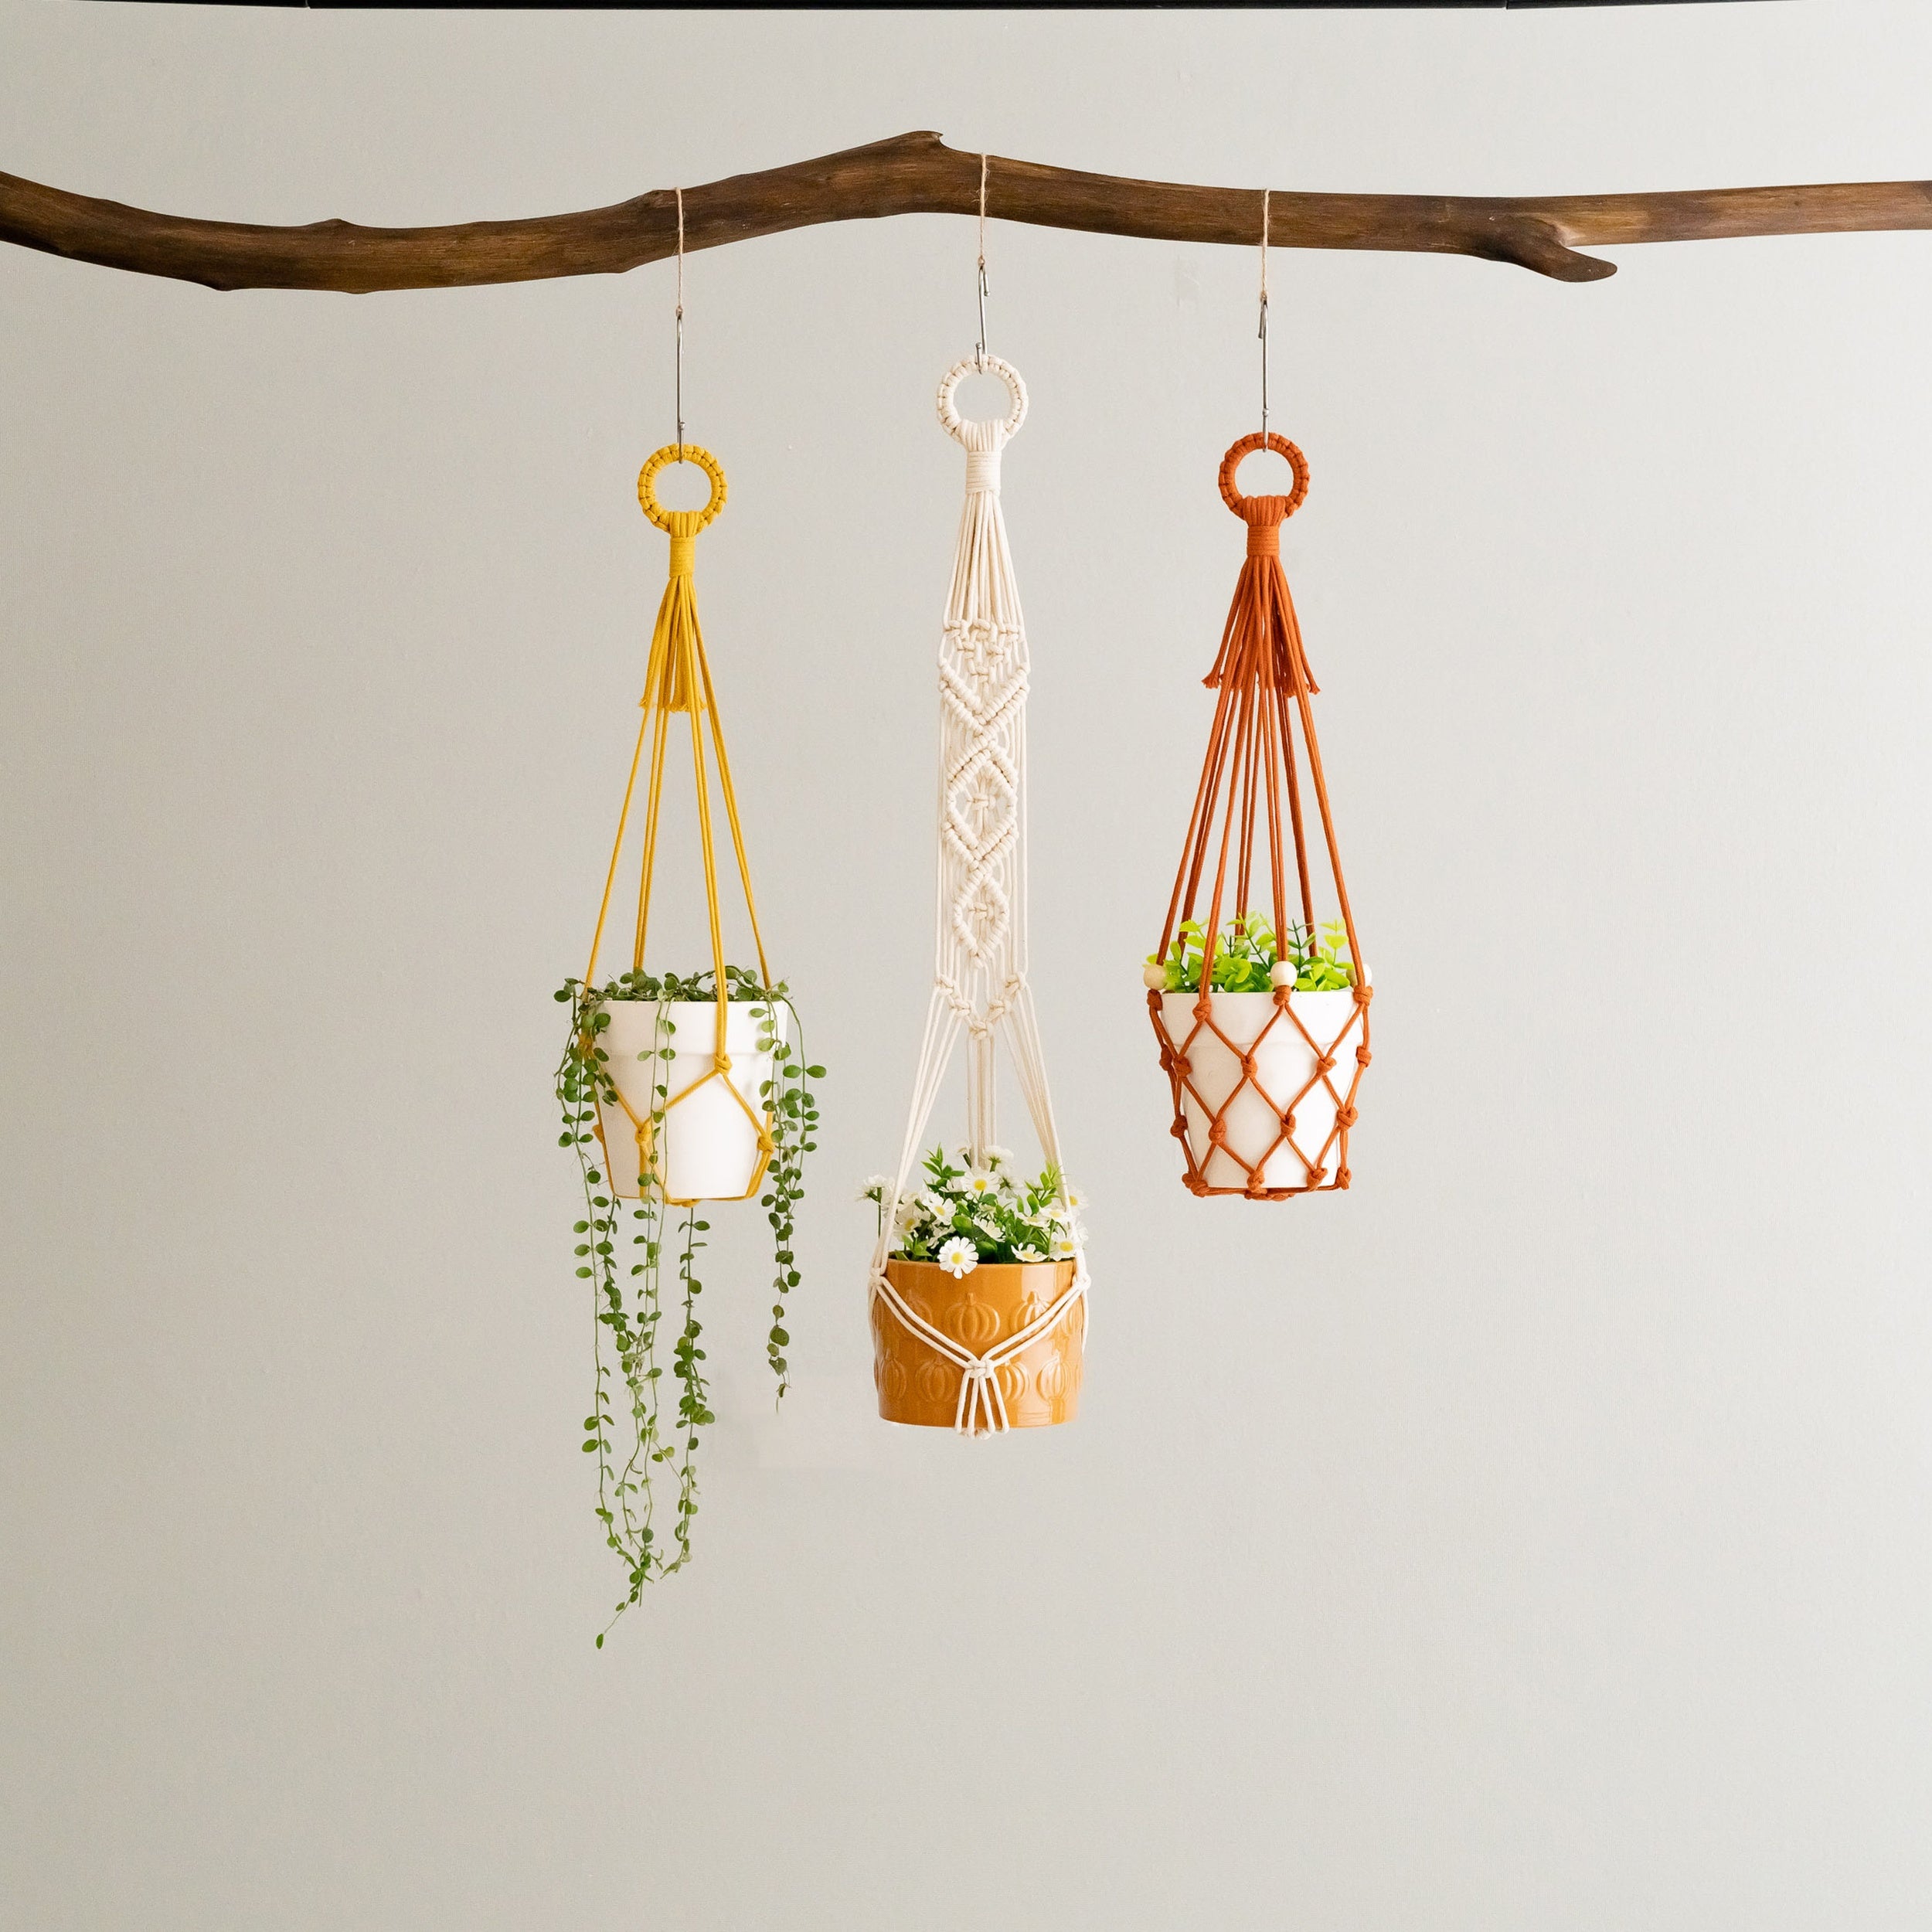 Wall Hanging Plant Holder for Stylish Indoor and Balcony Decor